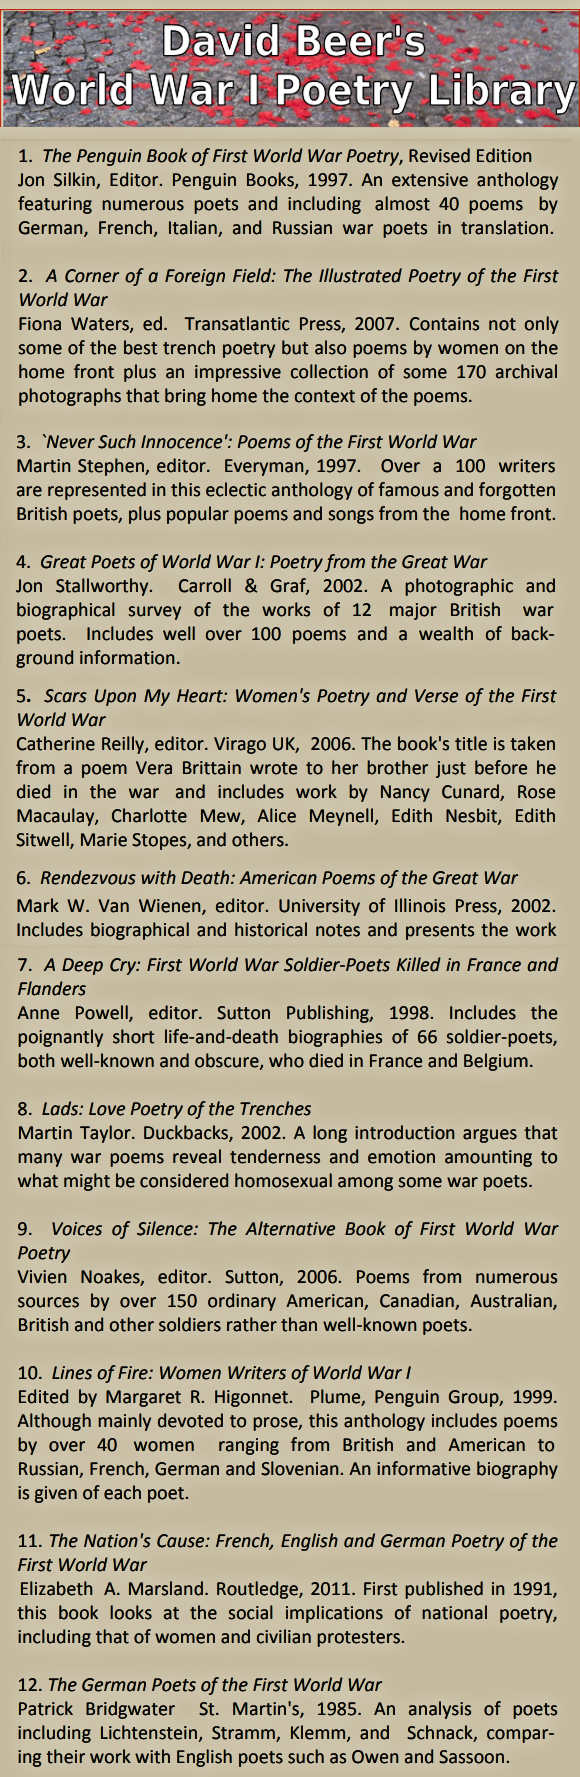 Your World War One Poetry Library